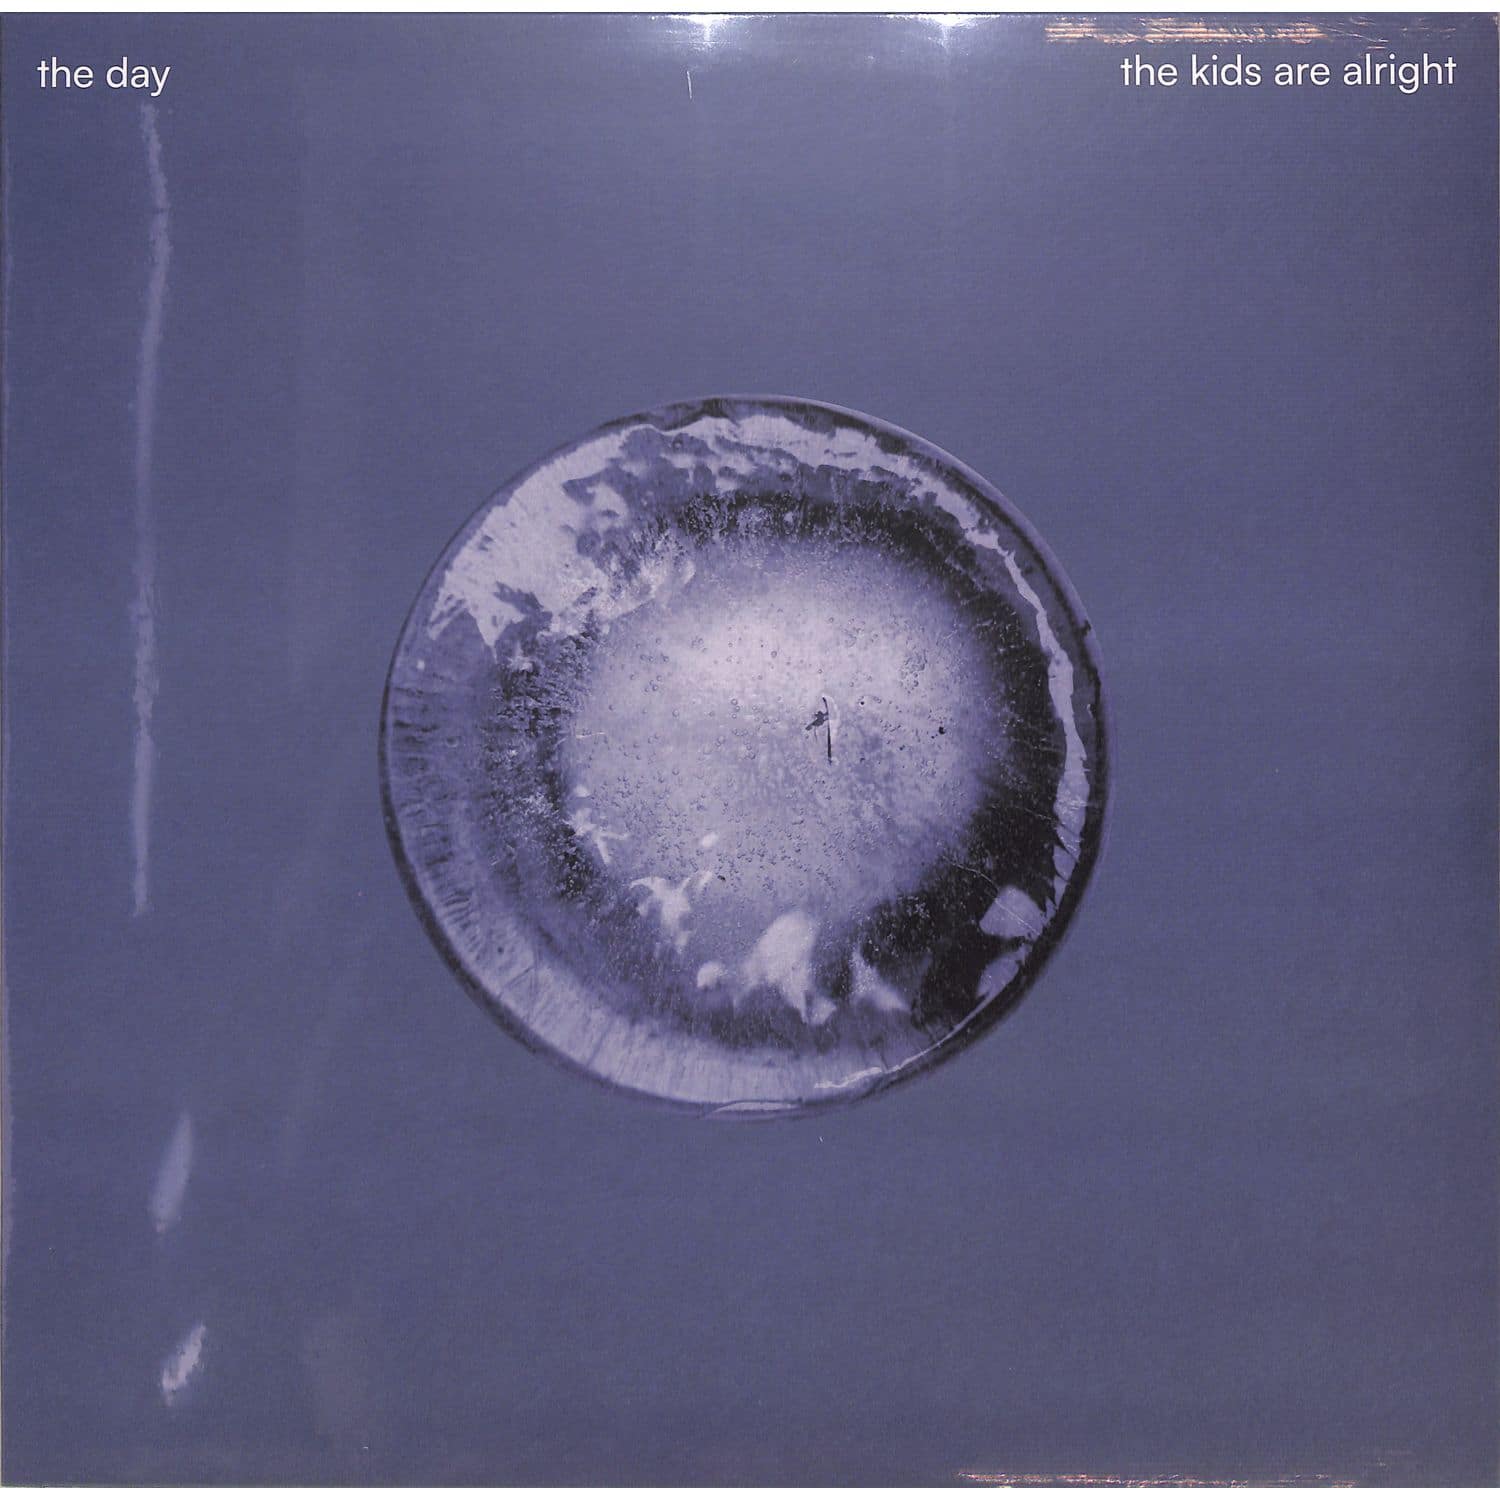 The Day - THE KIDS ARE ALRIGHT 